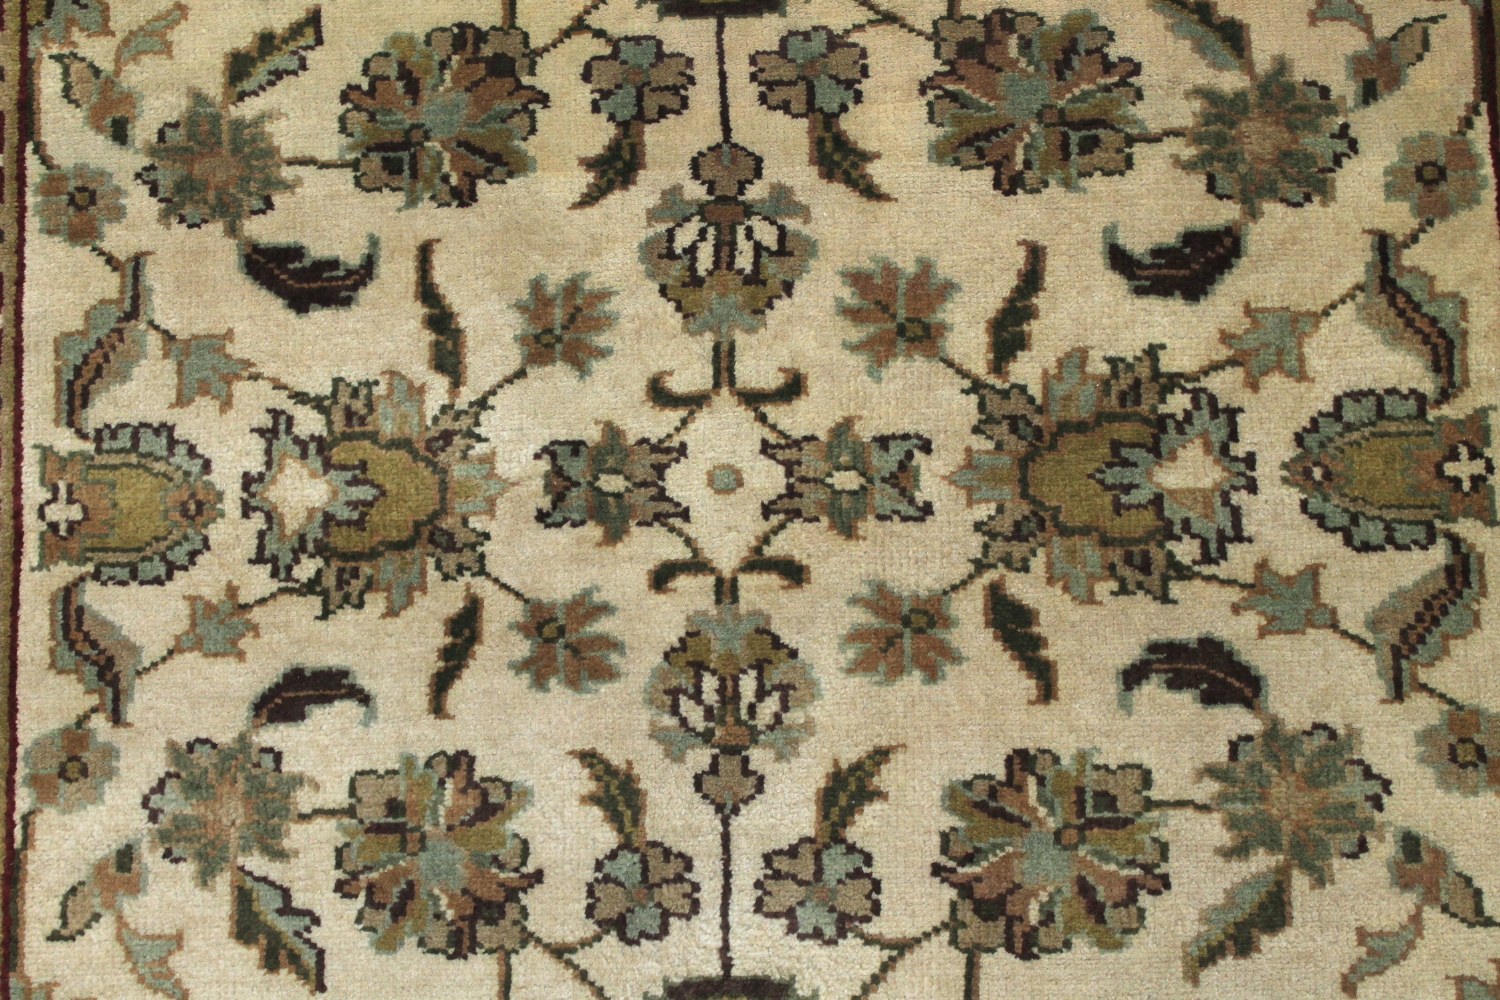 4x6 Traditional Hand Knotted Wool Area Rug - MR0058